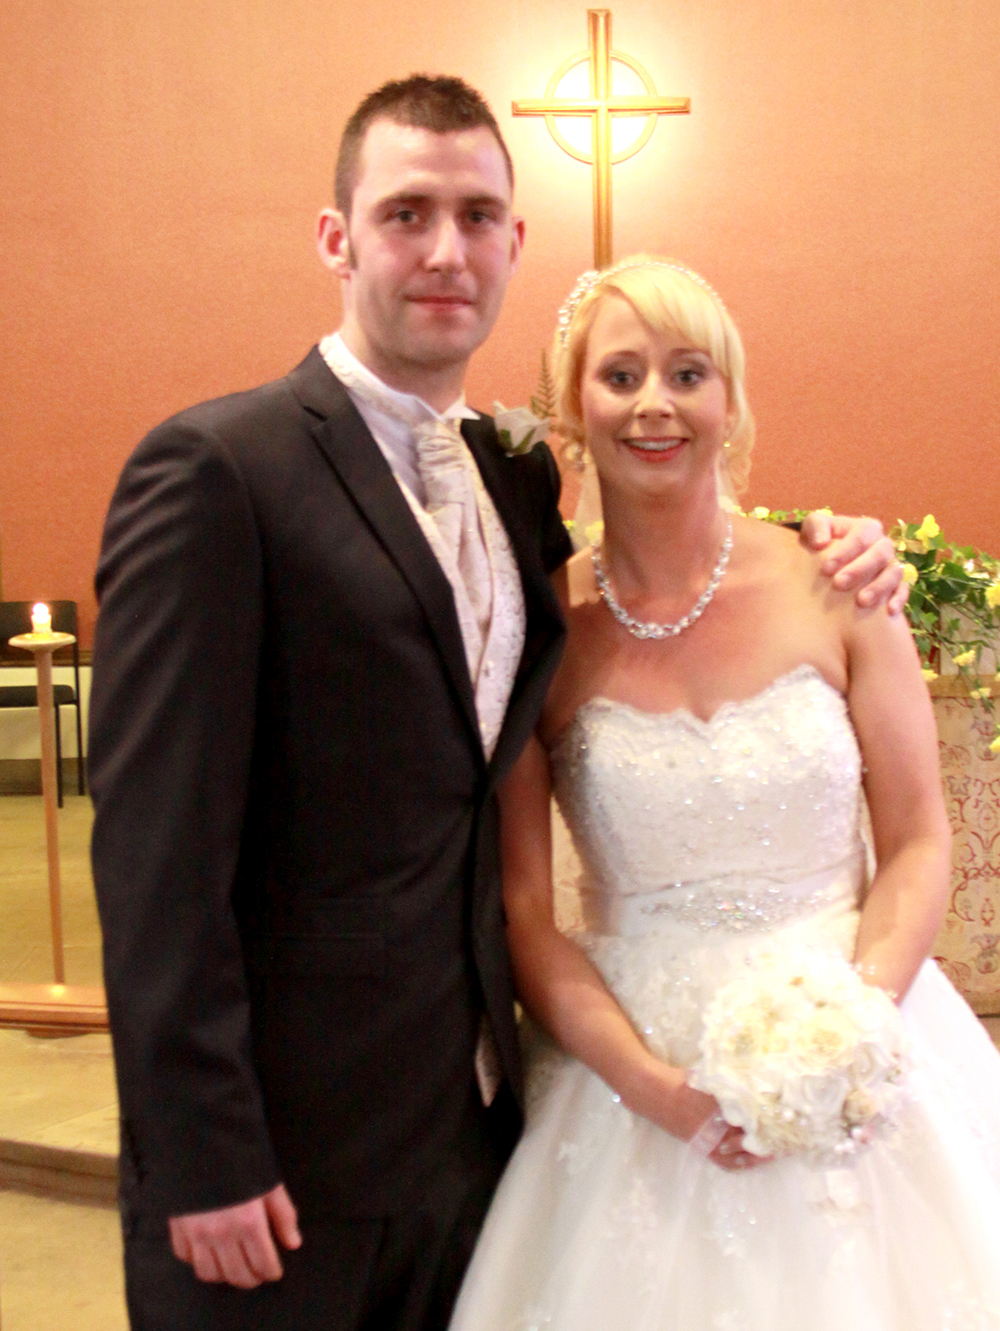 Married at St. Clare’s